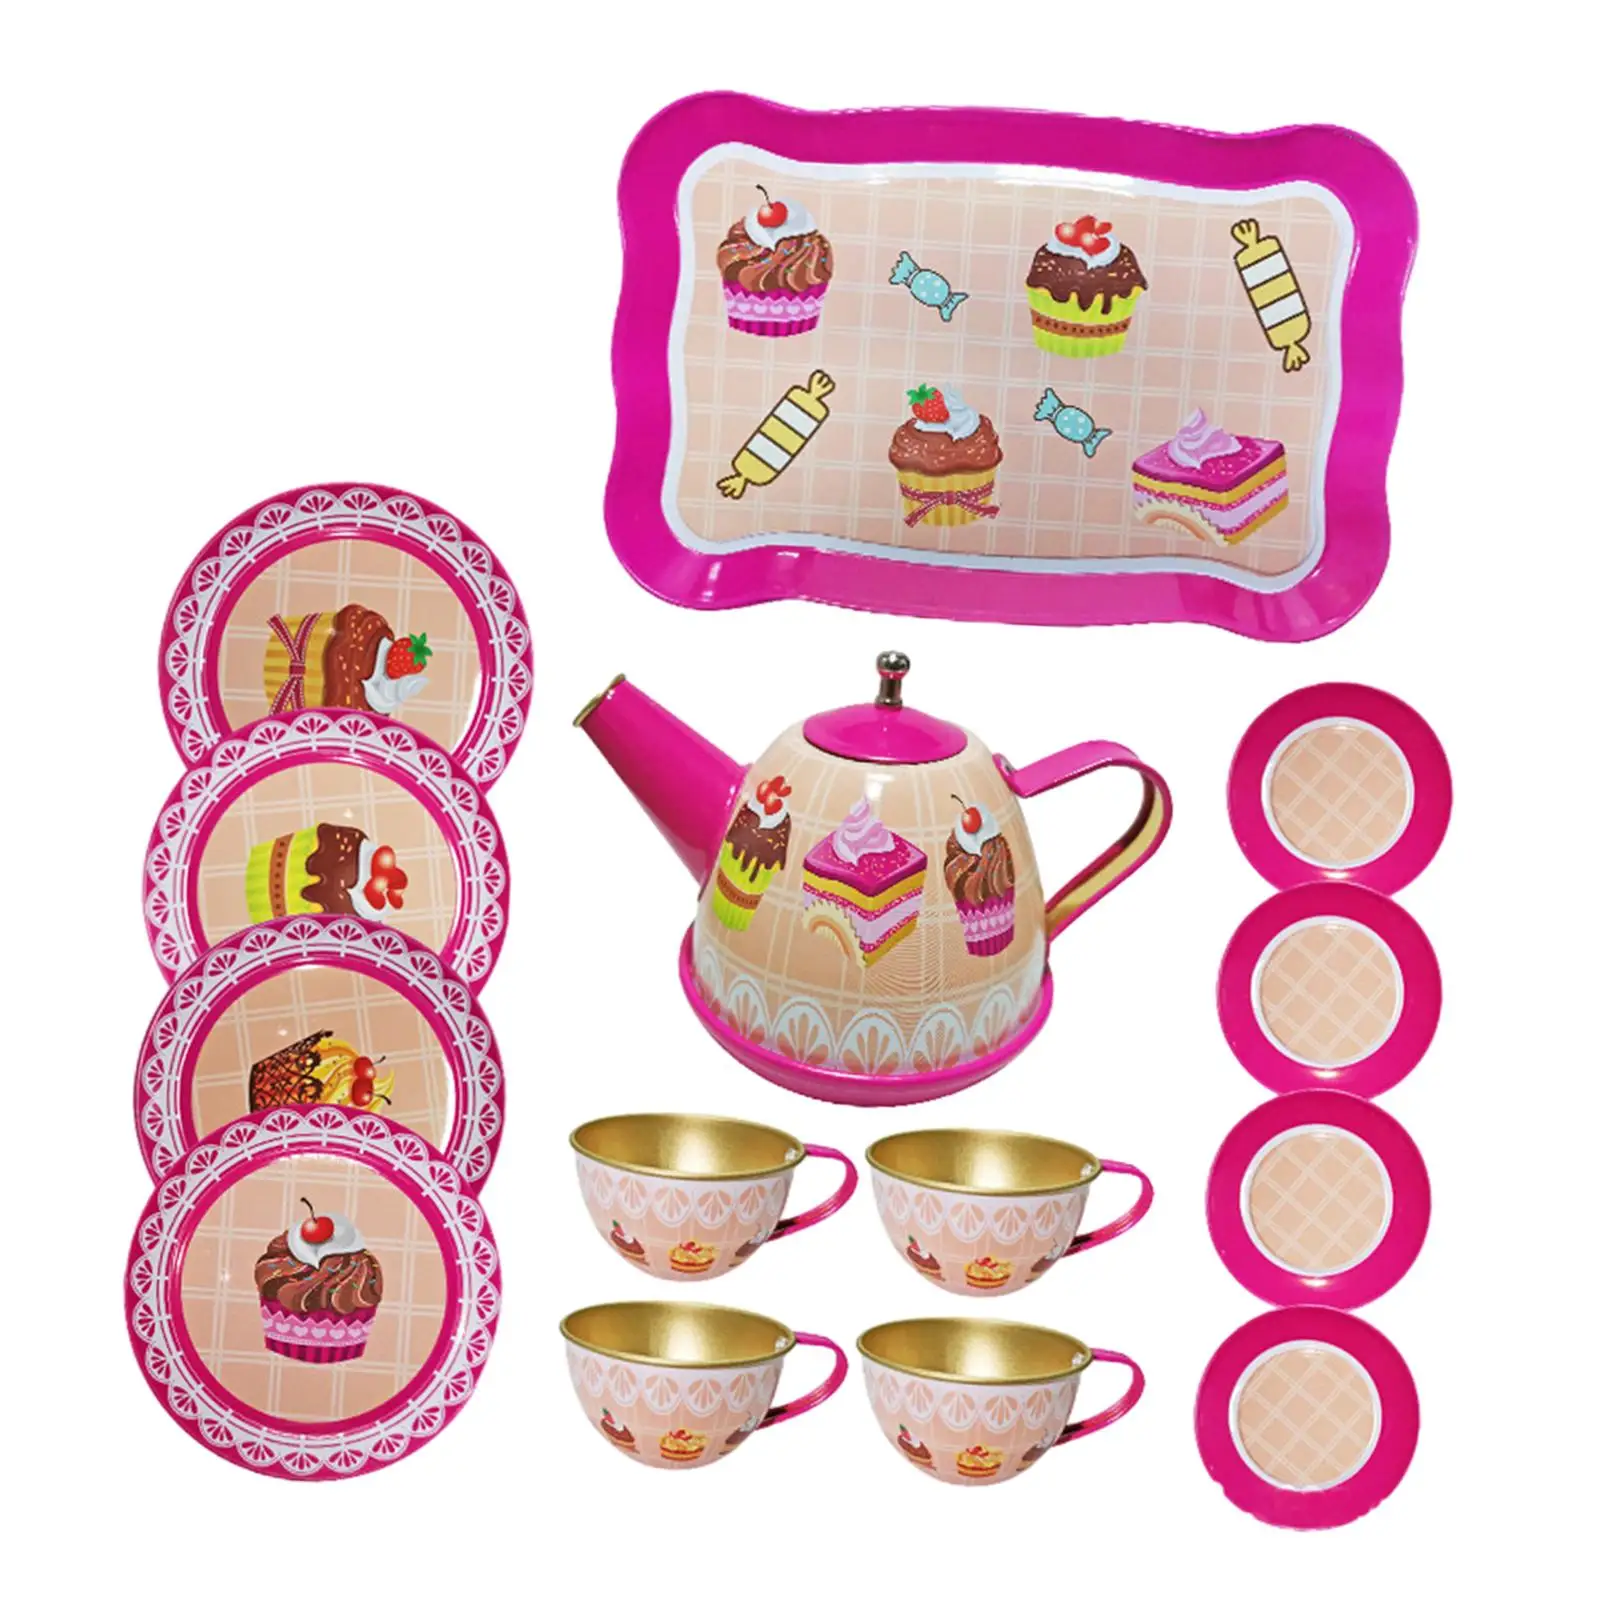 Little Girl Tea Party Set Realistic Educational Teapot Cups Dishes Toddlers Tea Set for Age 3 4 5 6 Birthday Gift Toddlers